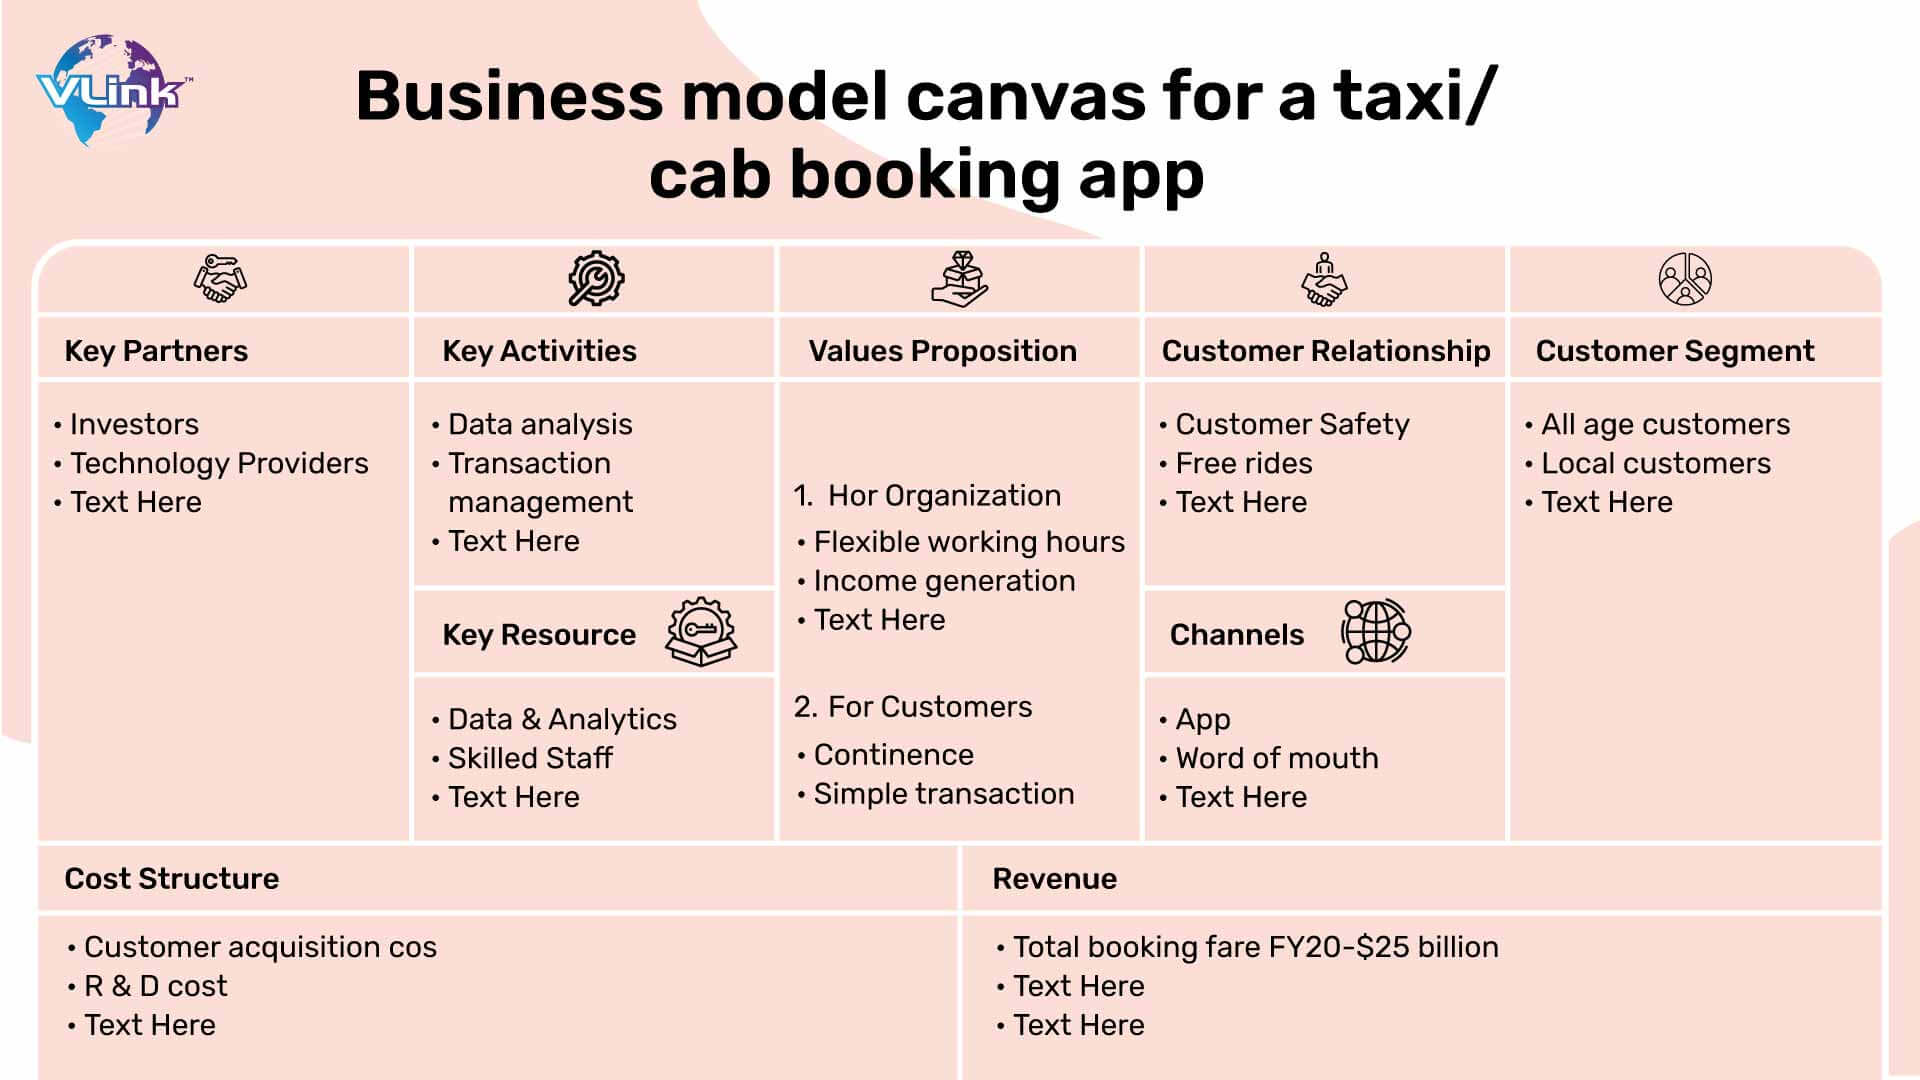 Business model canvas for a taxicab booking app